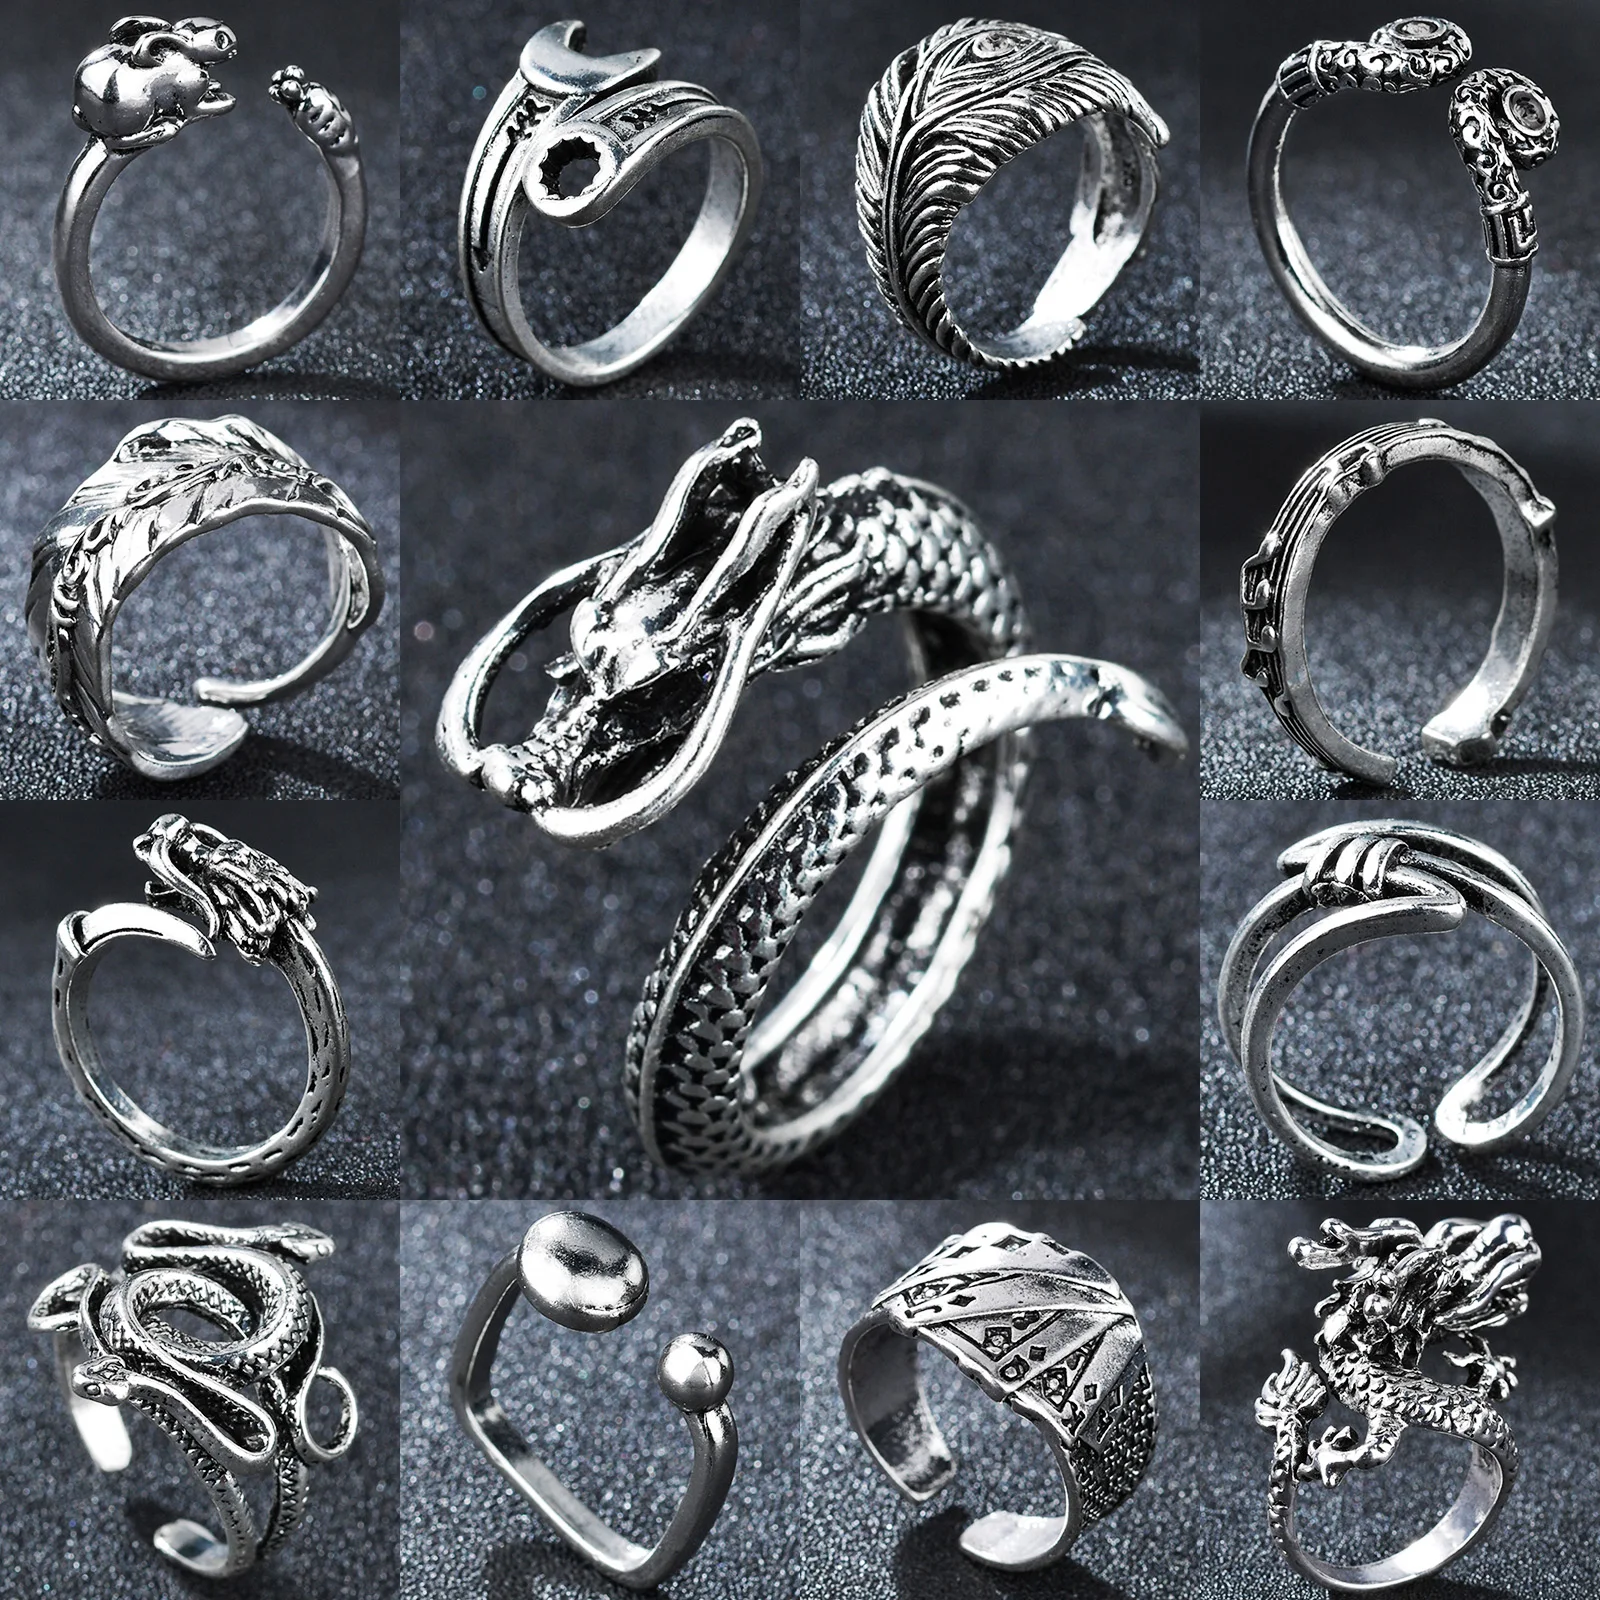 Adjustable Vintage Silver Color Punk Dragon Rings For Men Women Biker Rock Opening Ring Gothic Cool Valentine's Day Jewelry Gift